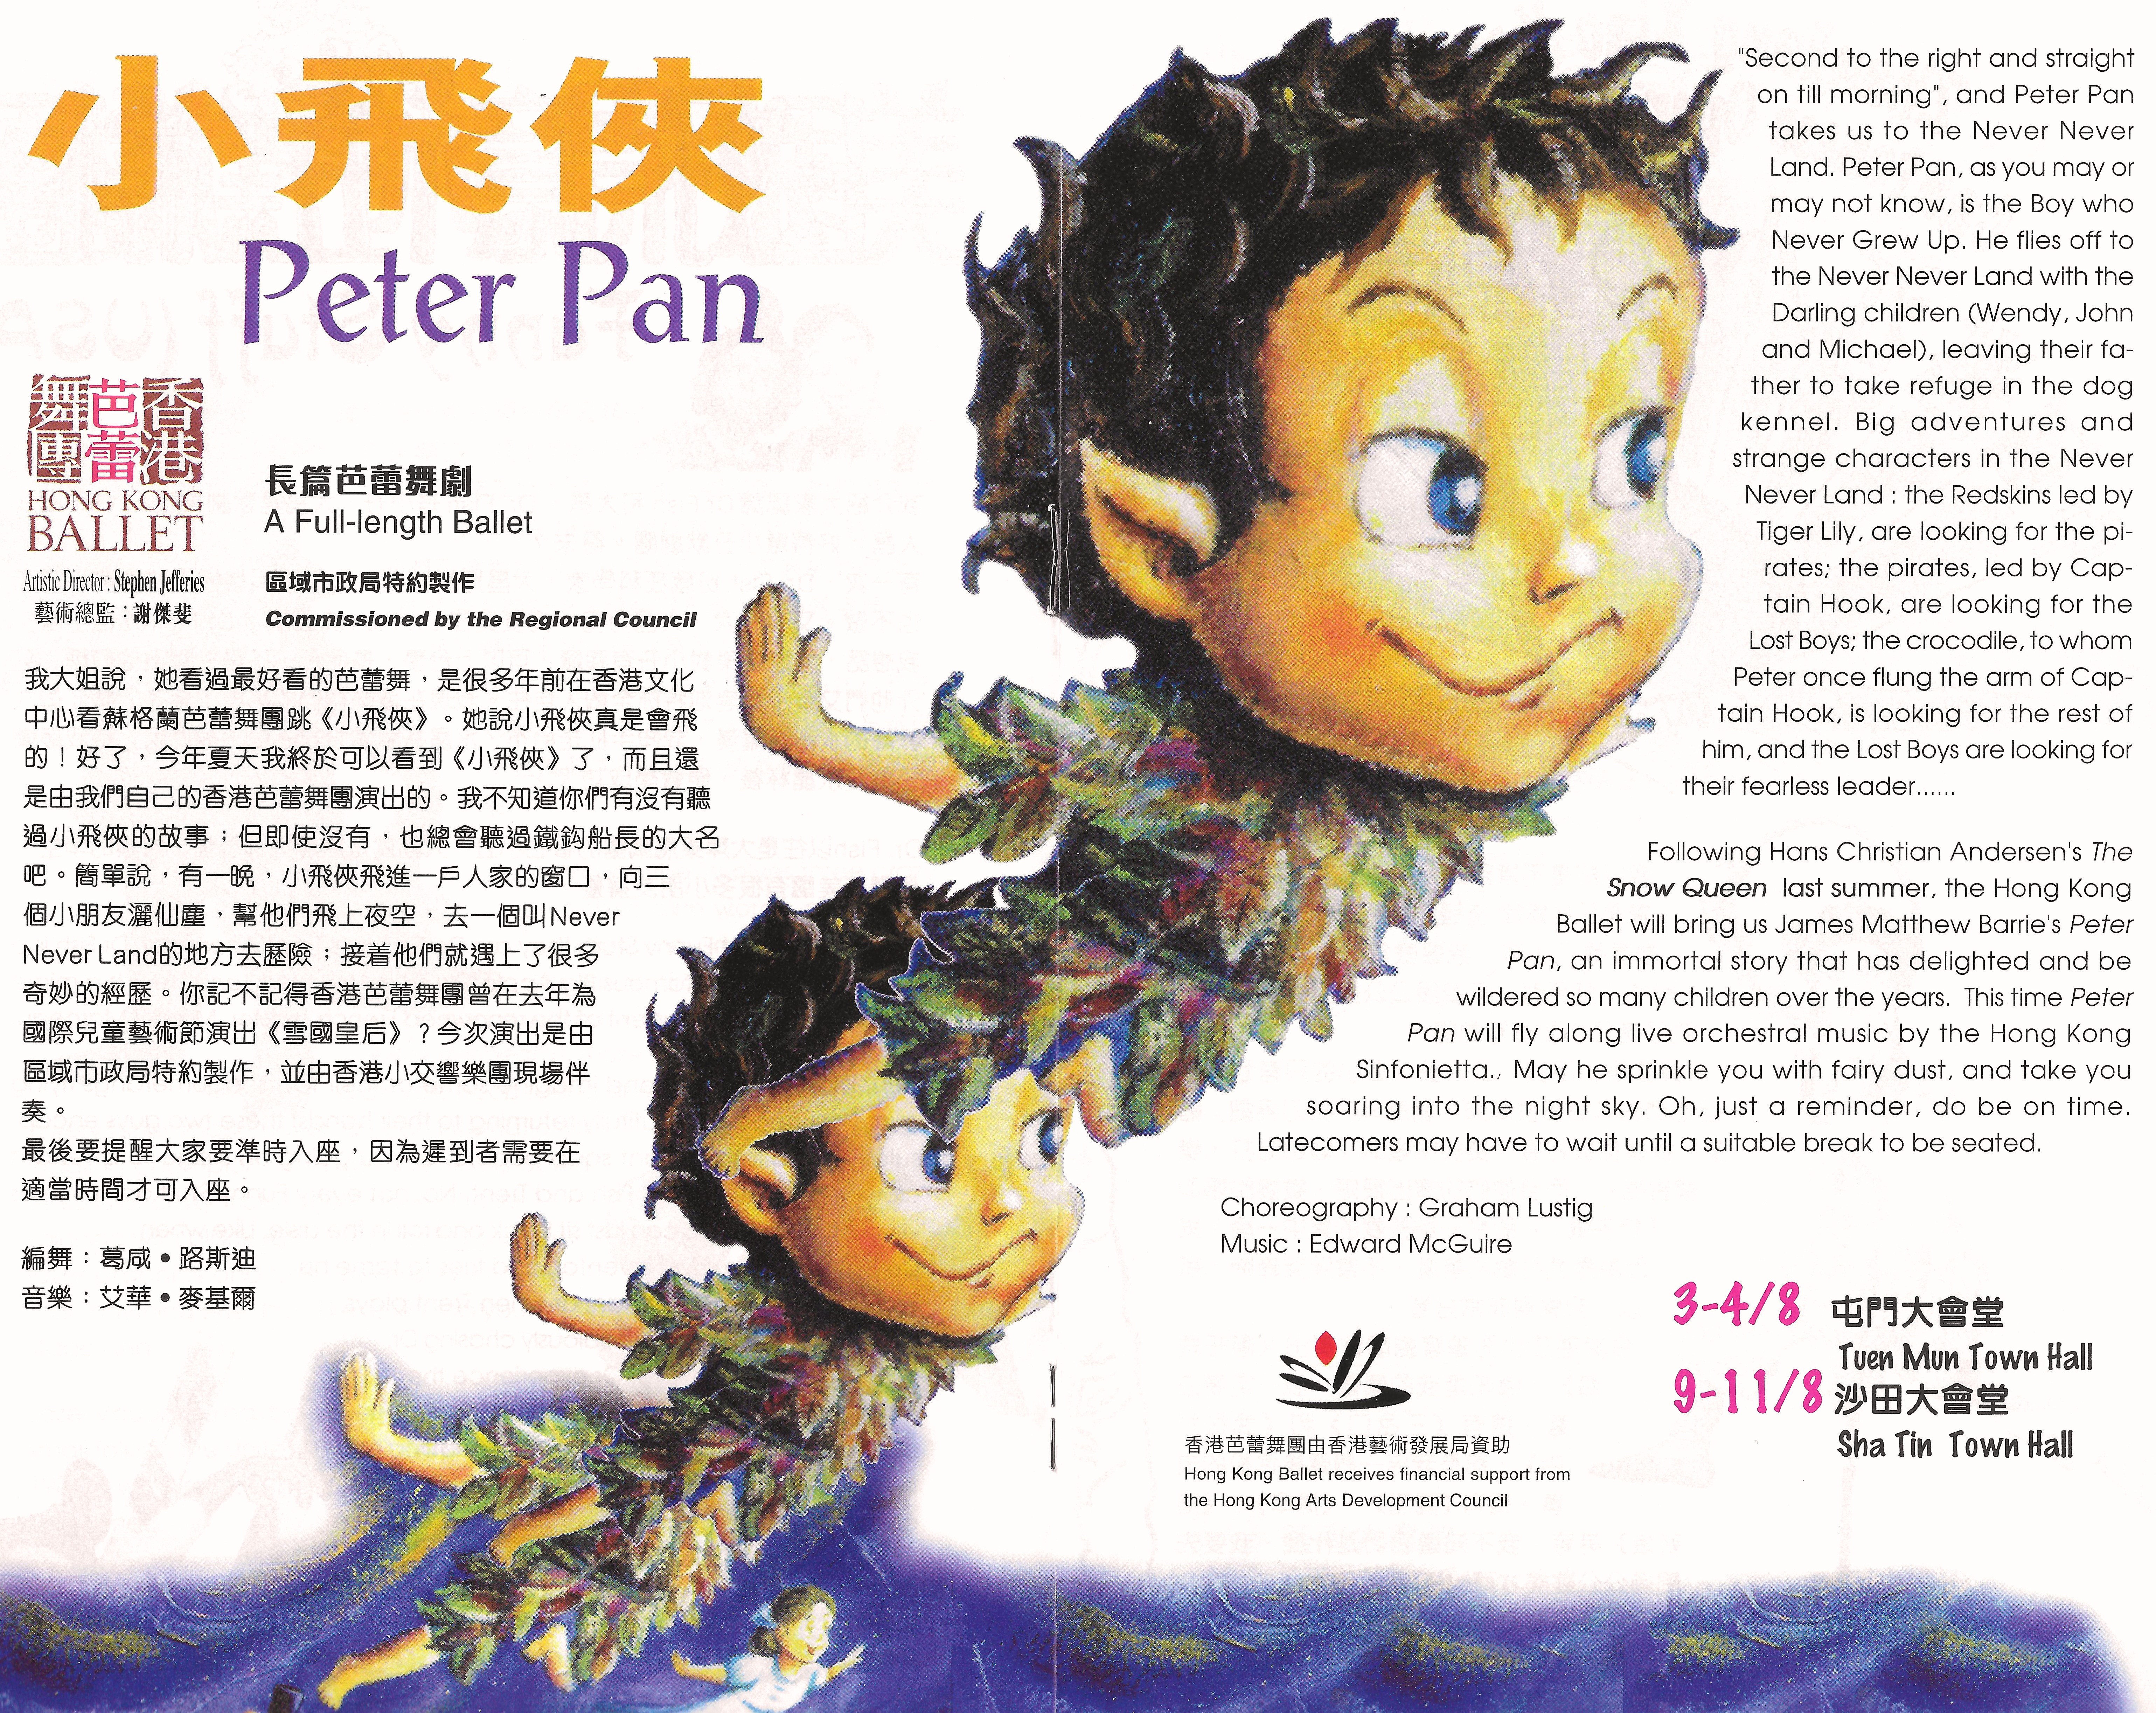 From the 1996 Hong Kong Ballet production of McGuire's Peter Pan ballet